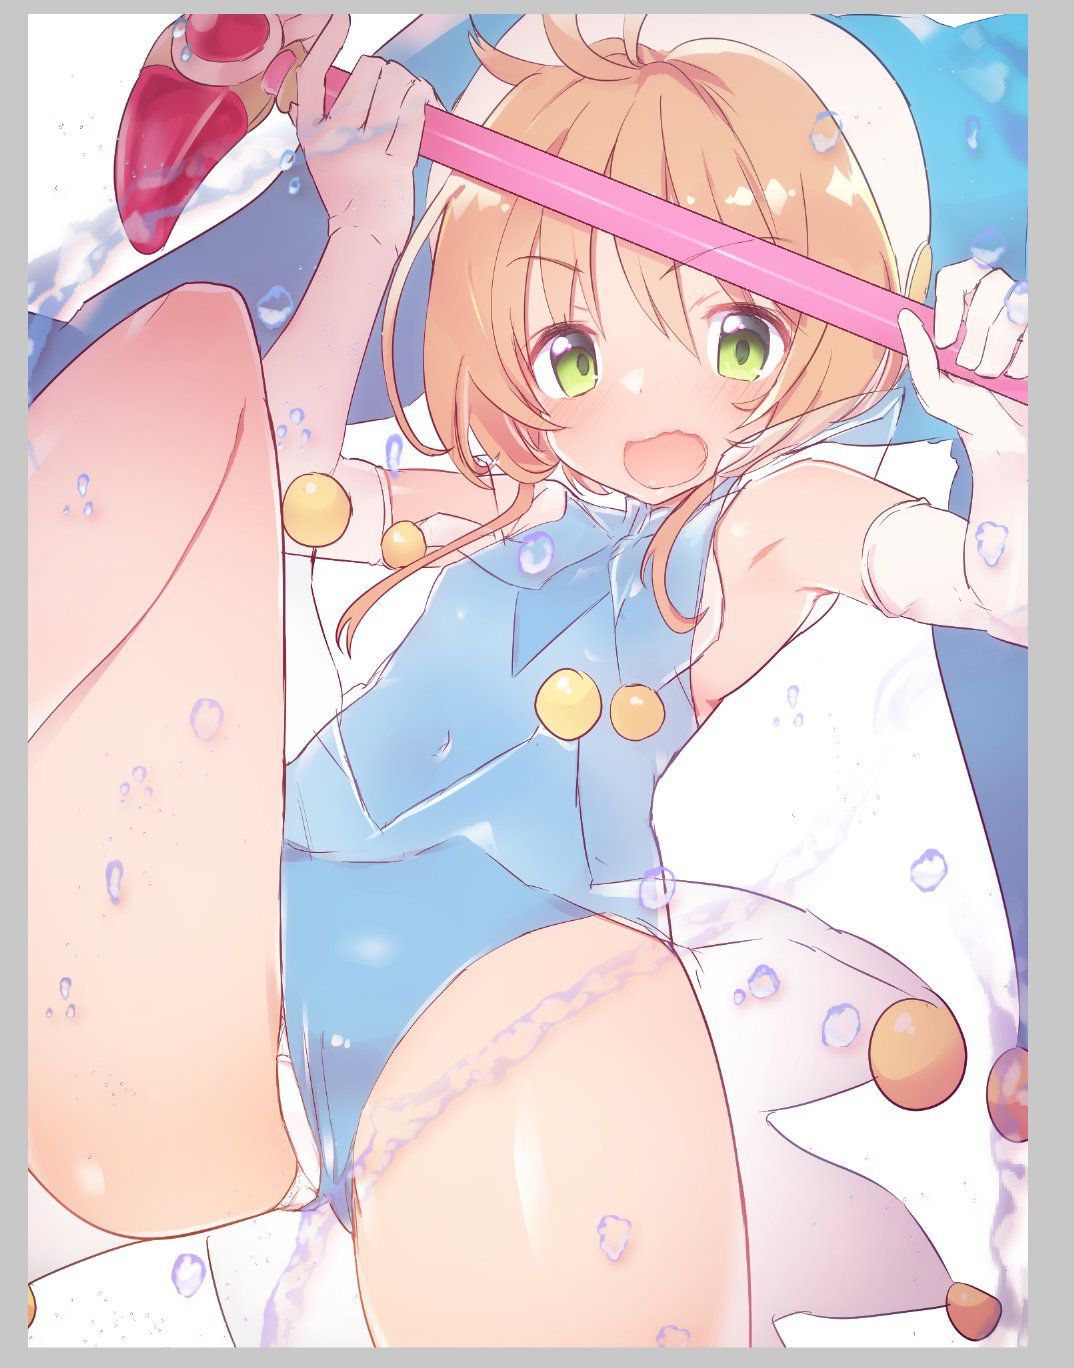 You want to see a naughty picture of card captor Sakura? 12